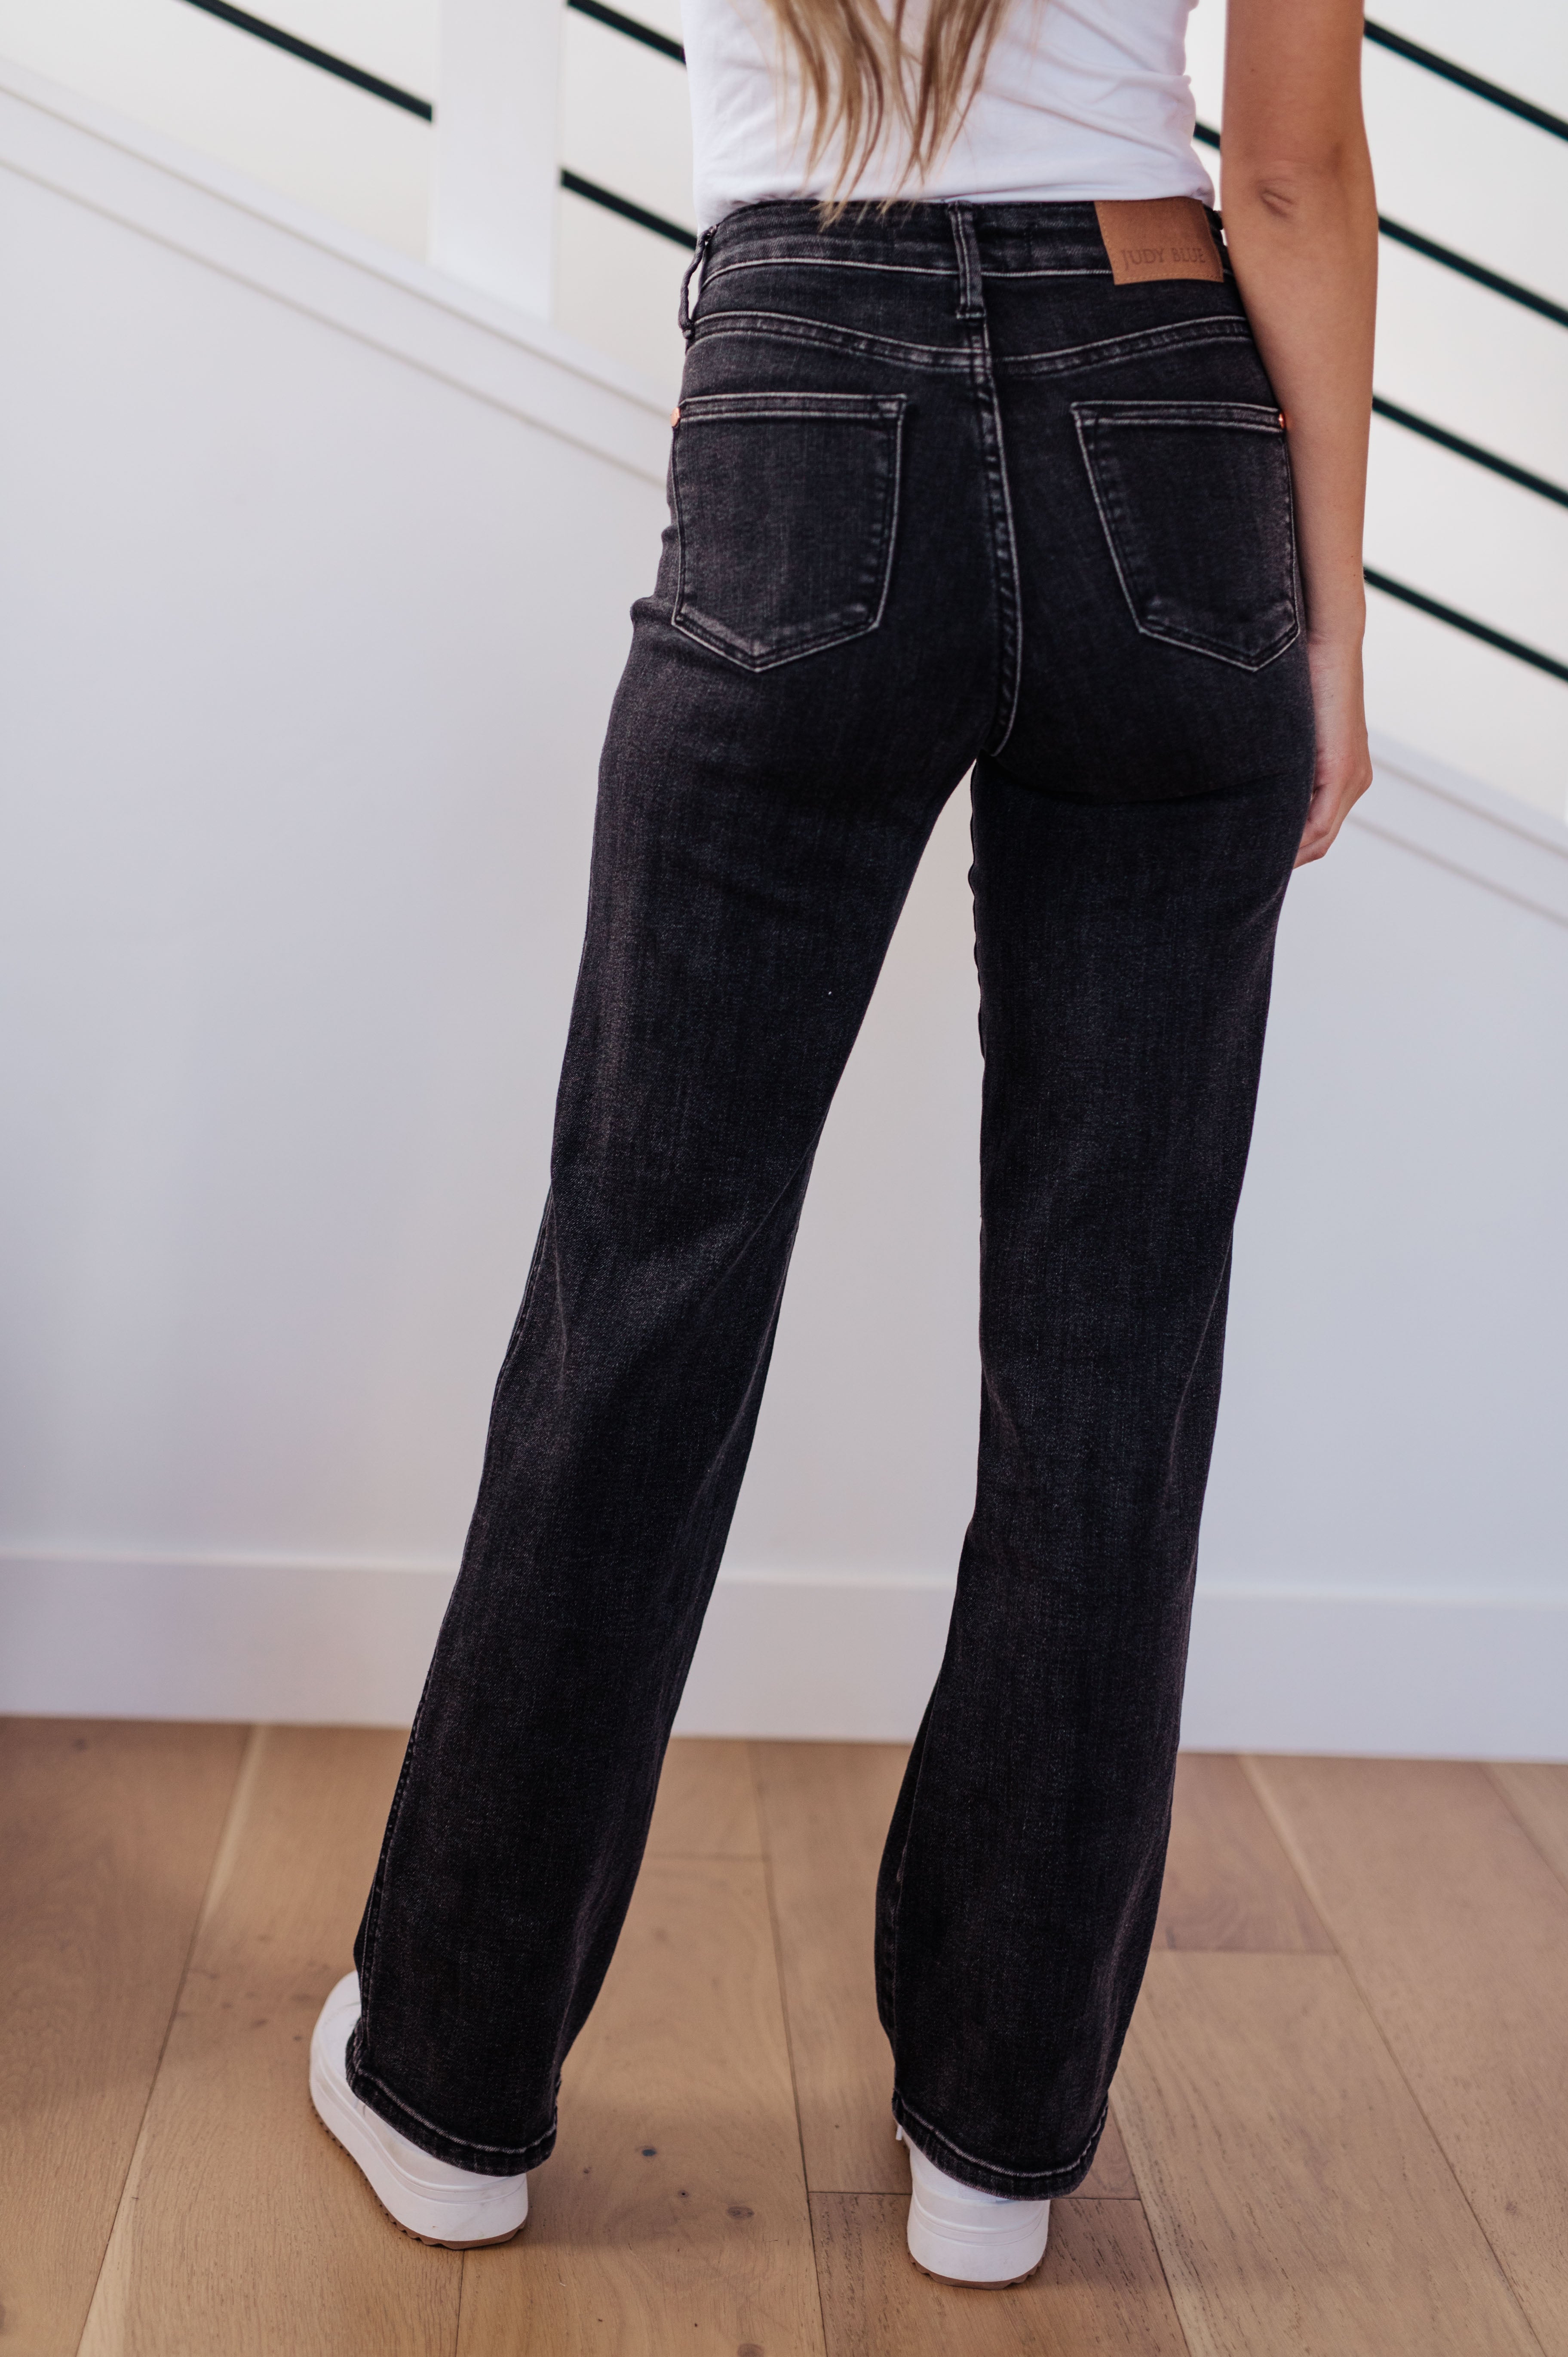 Judy Blue Joan High Rise Control Top Straight Jeans in Washed Black - Lola Cerina Boutique